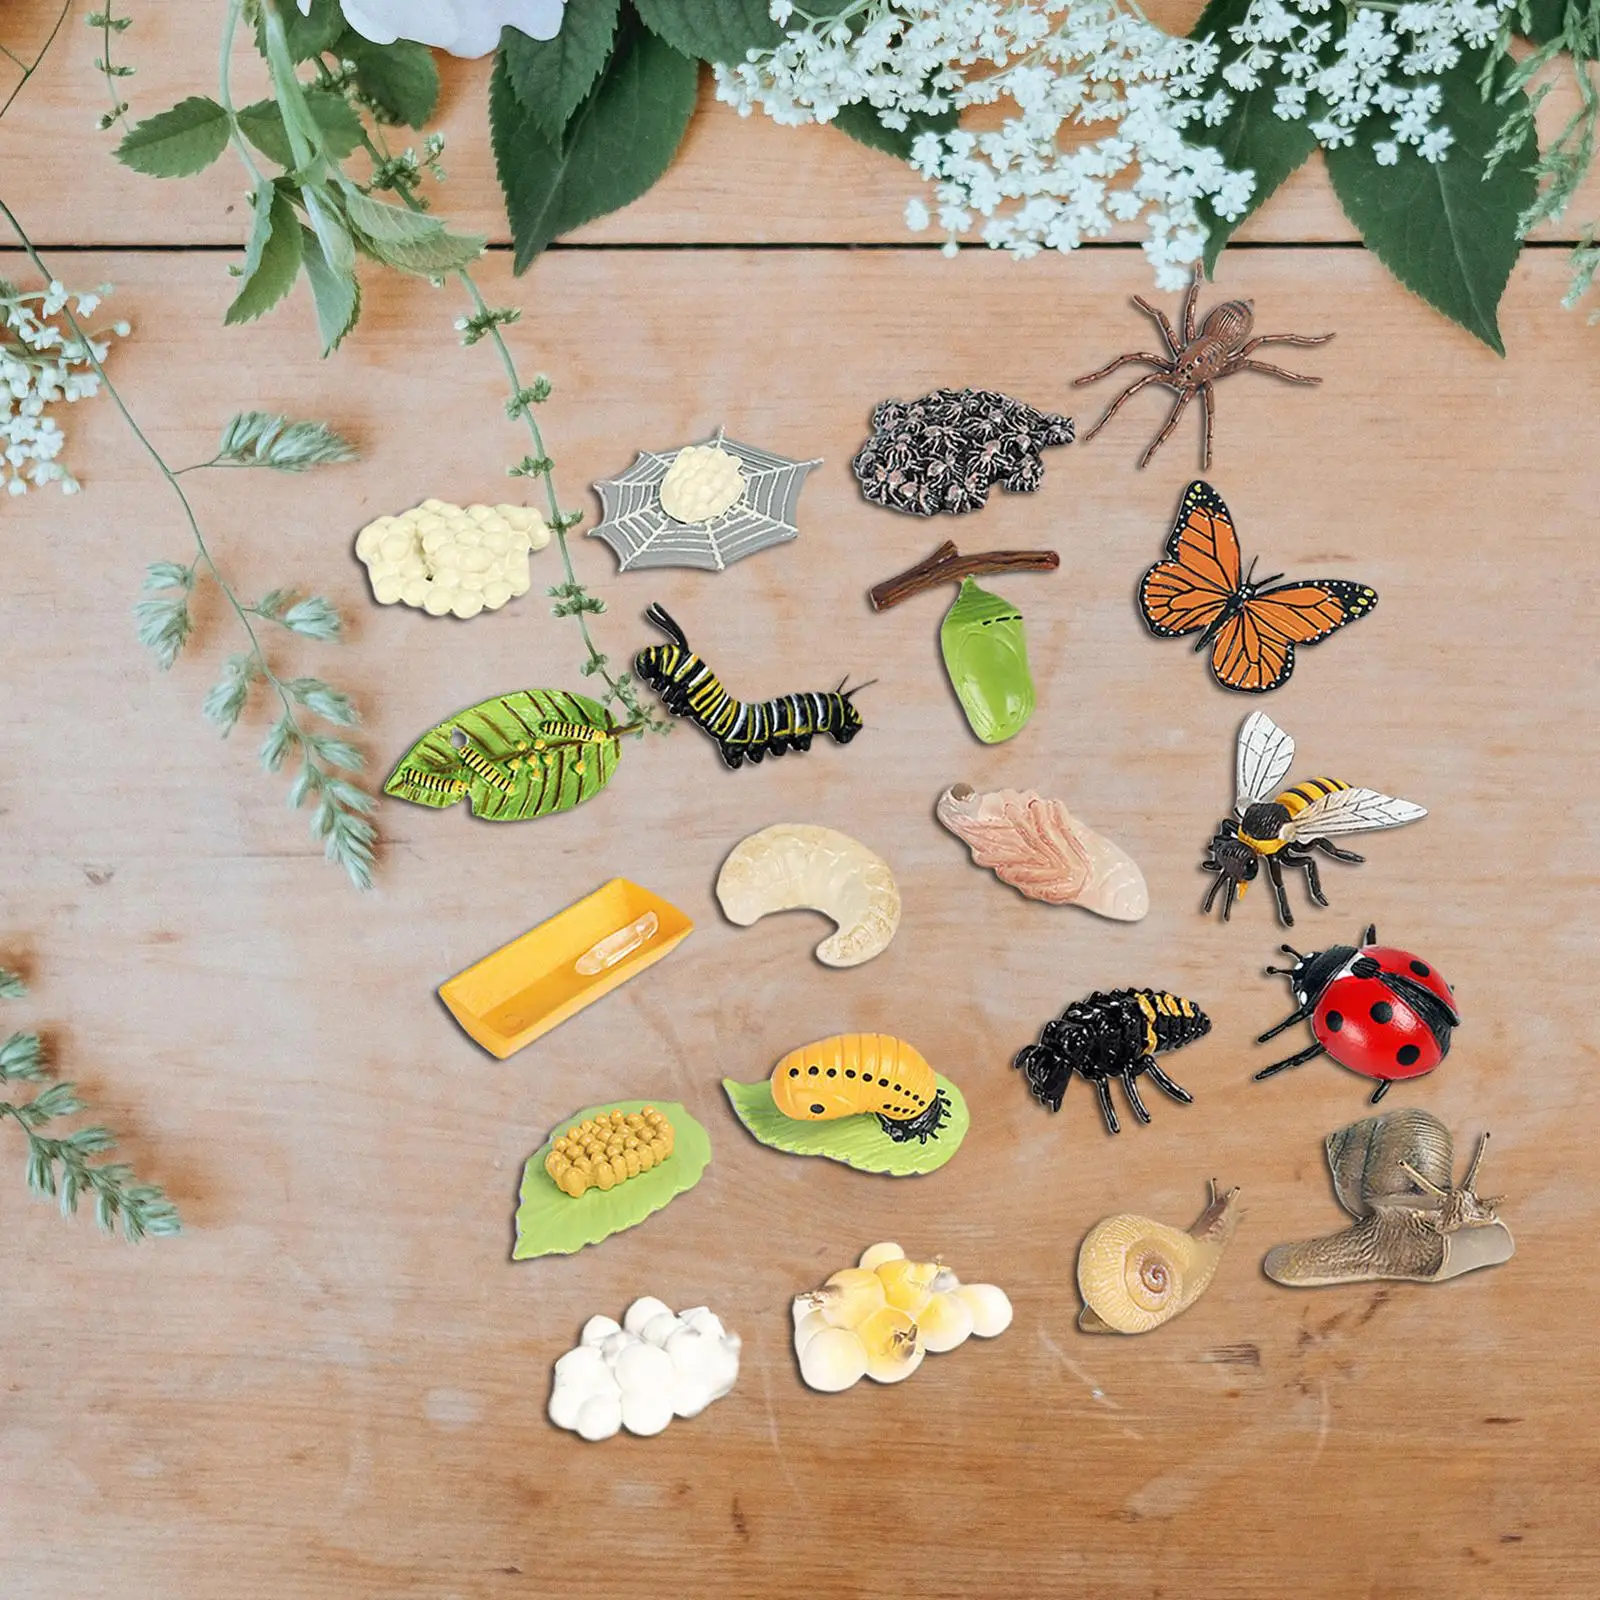 Insect Growth Cycle Set Model Kit Party Favors Science Cognition Teaching Tools Lifelike for Students Kids Preschool Toddlers